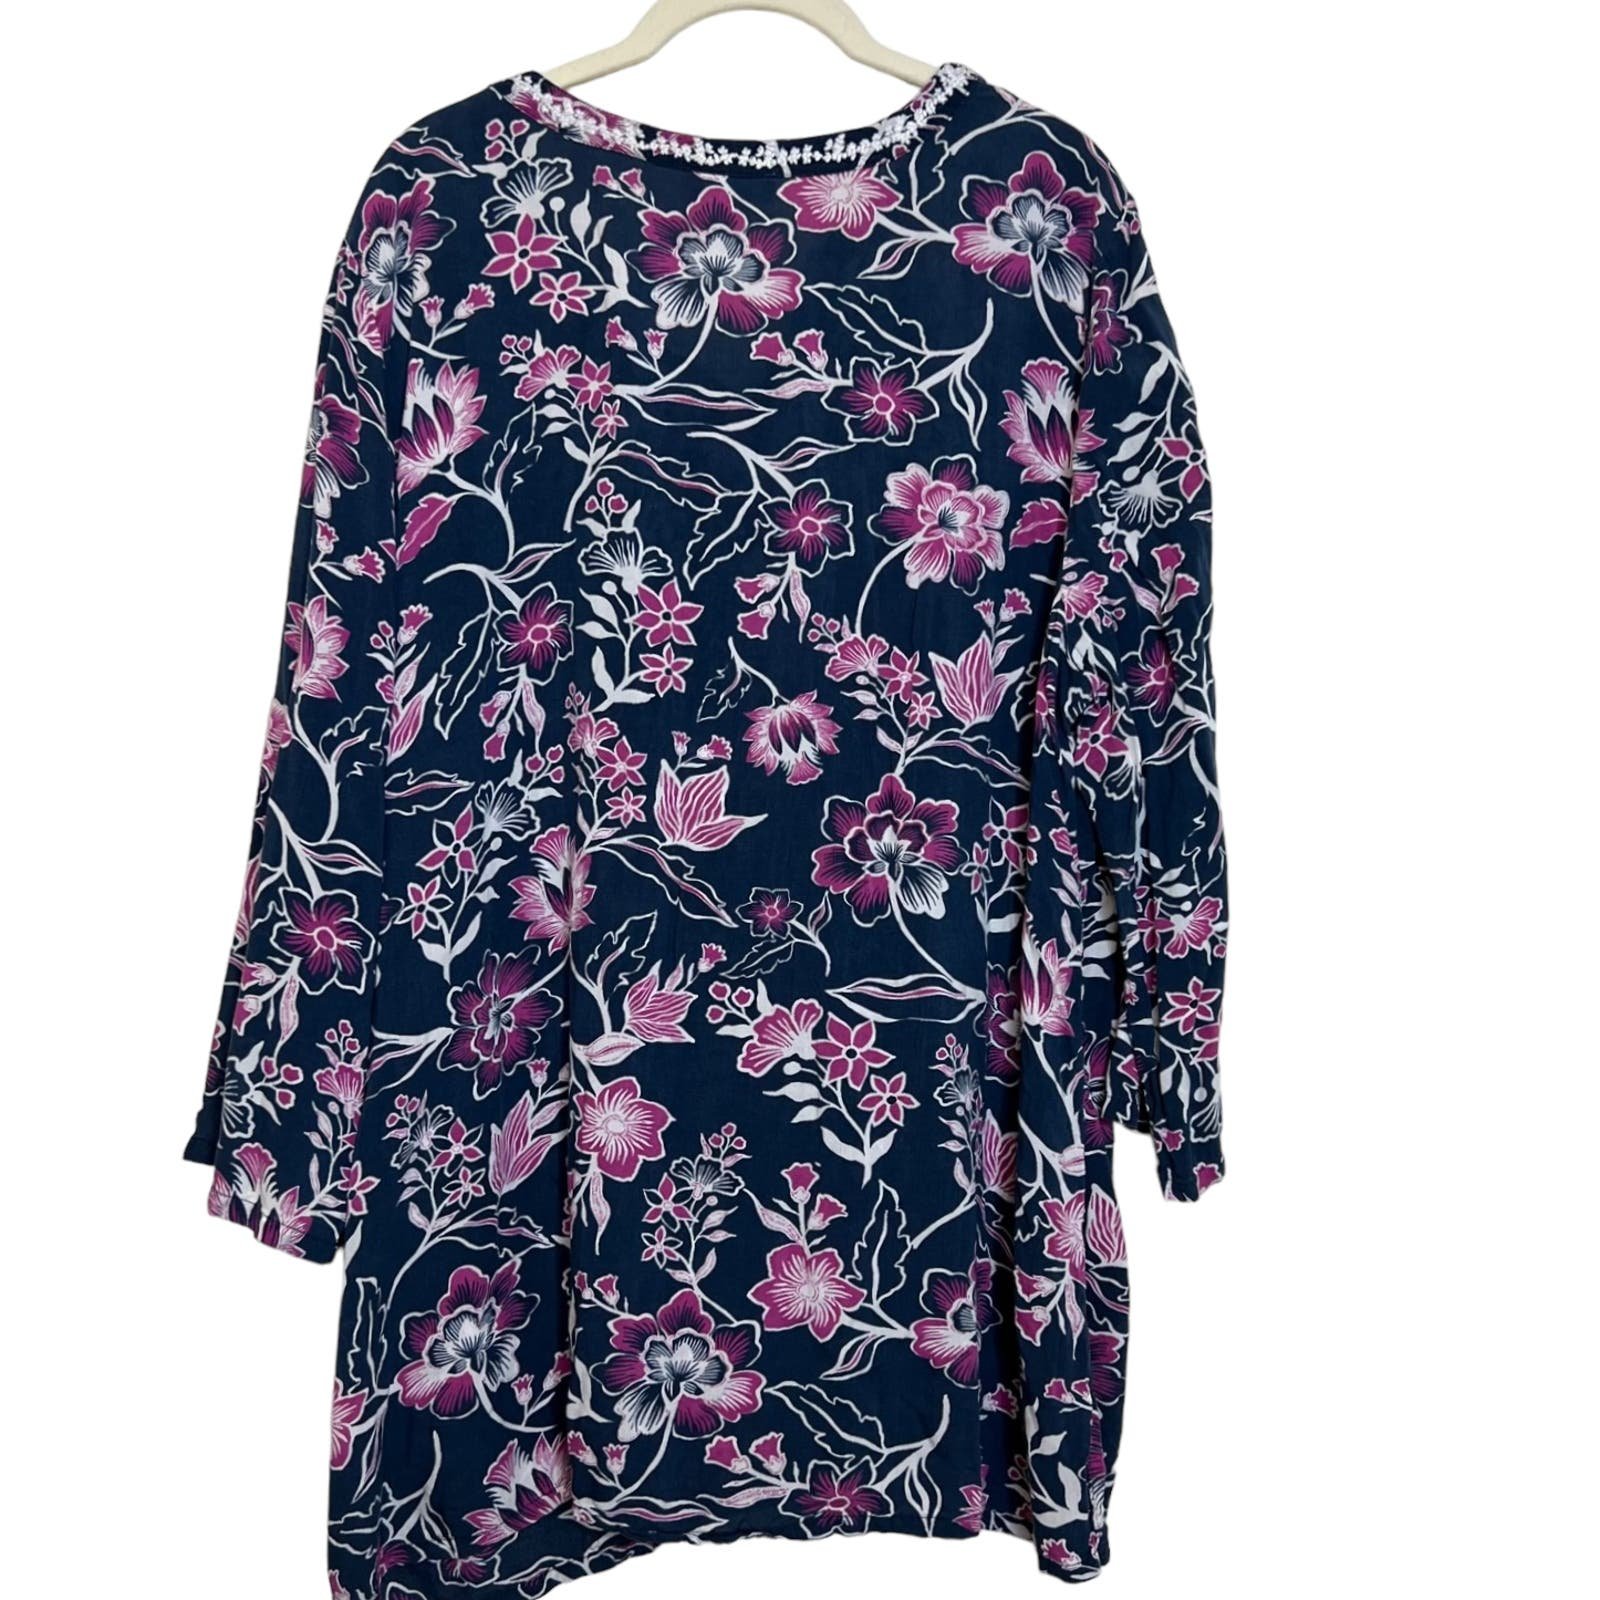 Buy Charter Club Woman Tunic 2X Blue Pink Floral Embroidered Lightweight V-Neck IjV4sOLWW Store Online